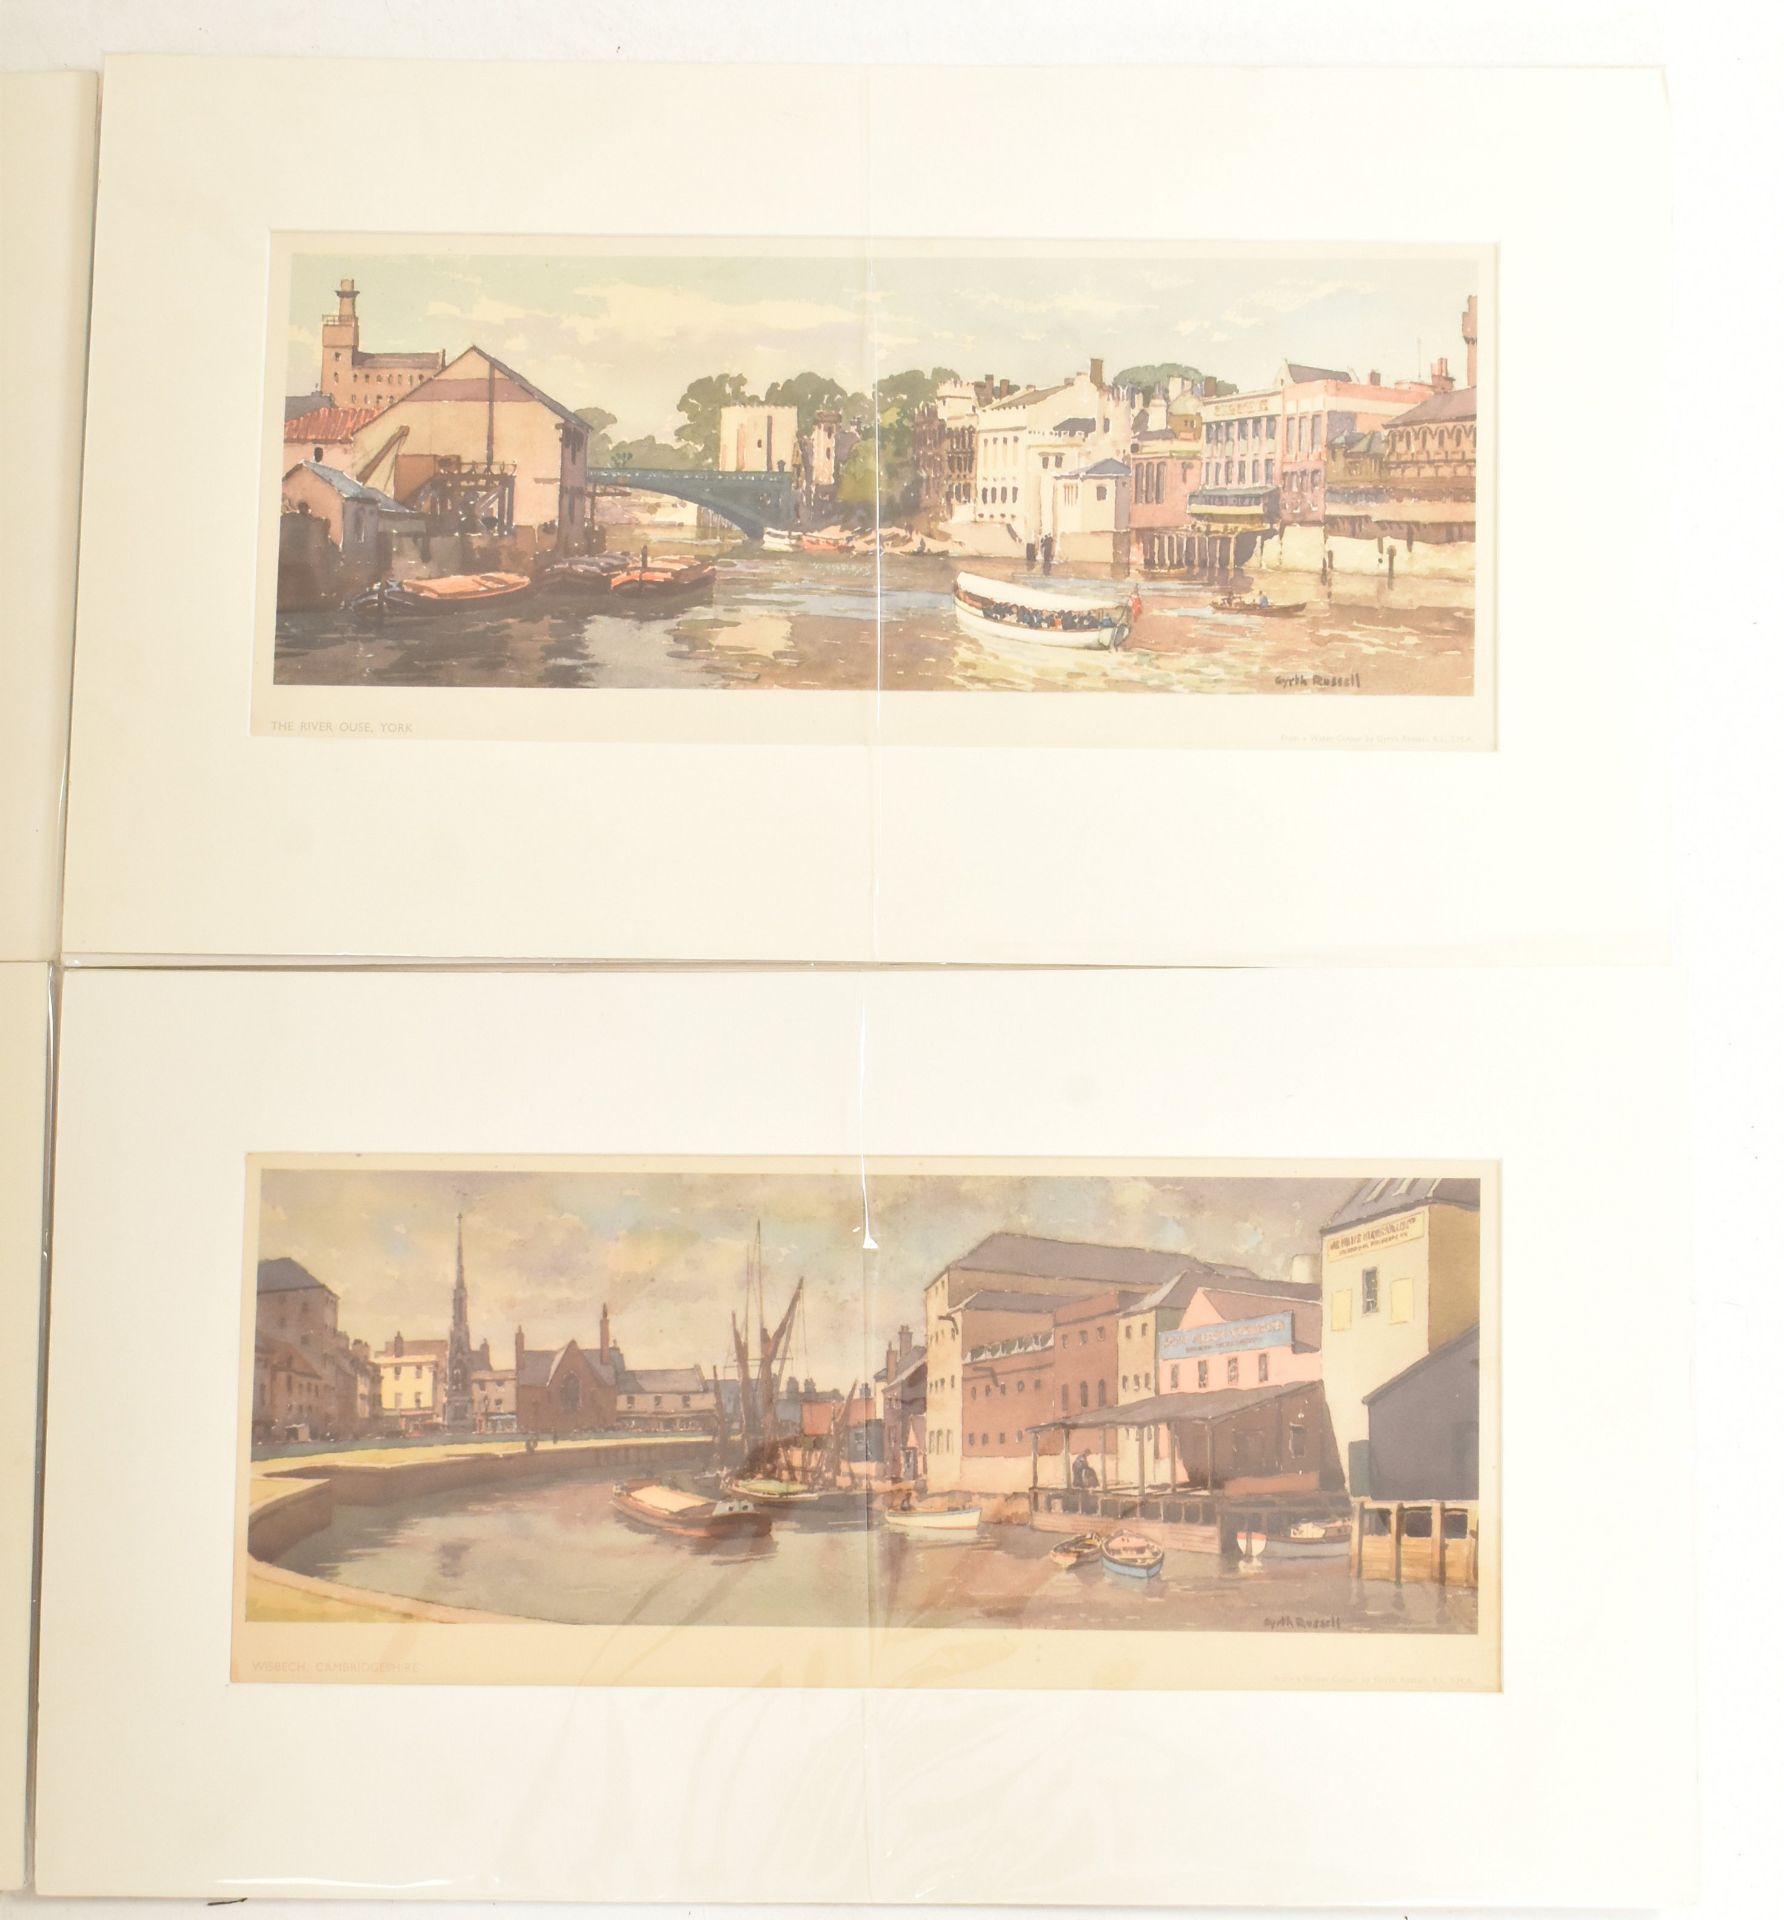 SIX BRITISH RAIL CARRIAGE PRINTS FROM GYRTH RUSSELL PAINTINGS - Image 4 of 5